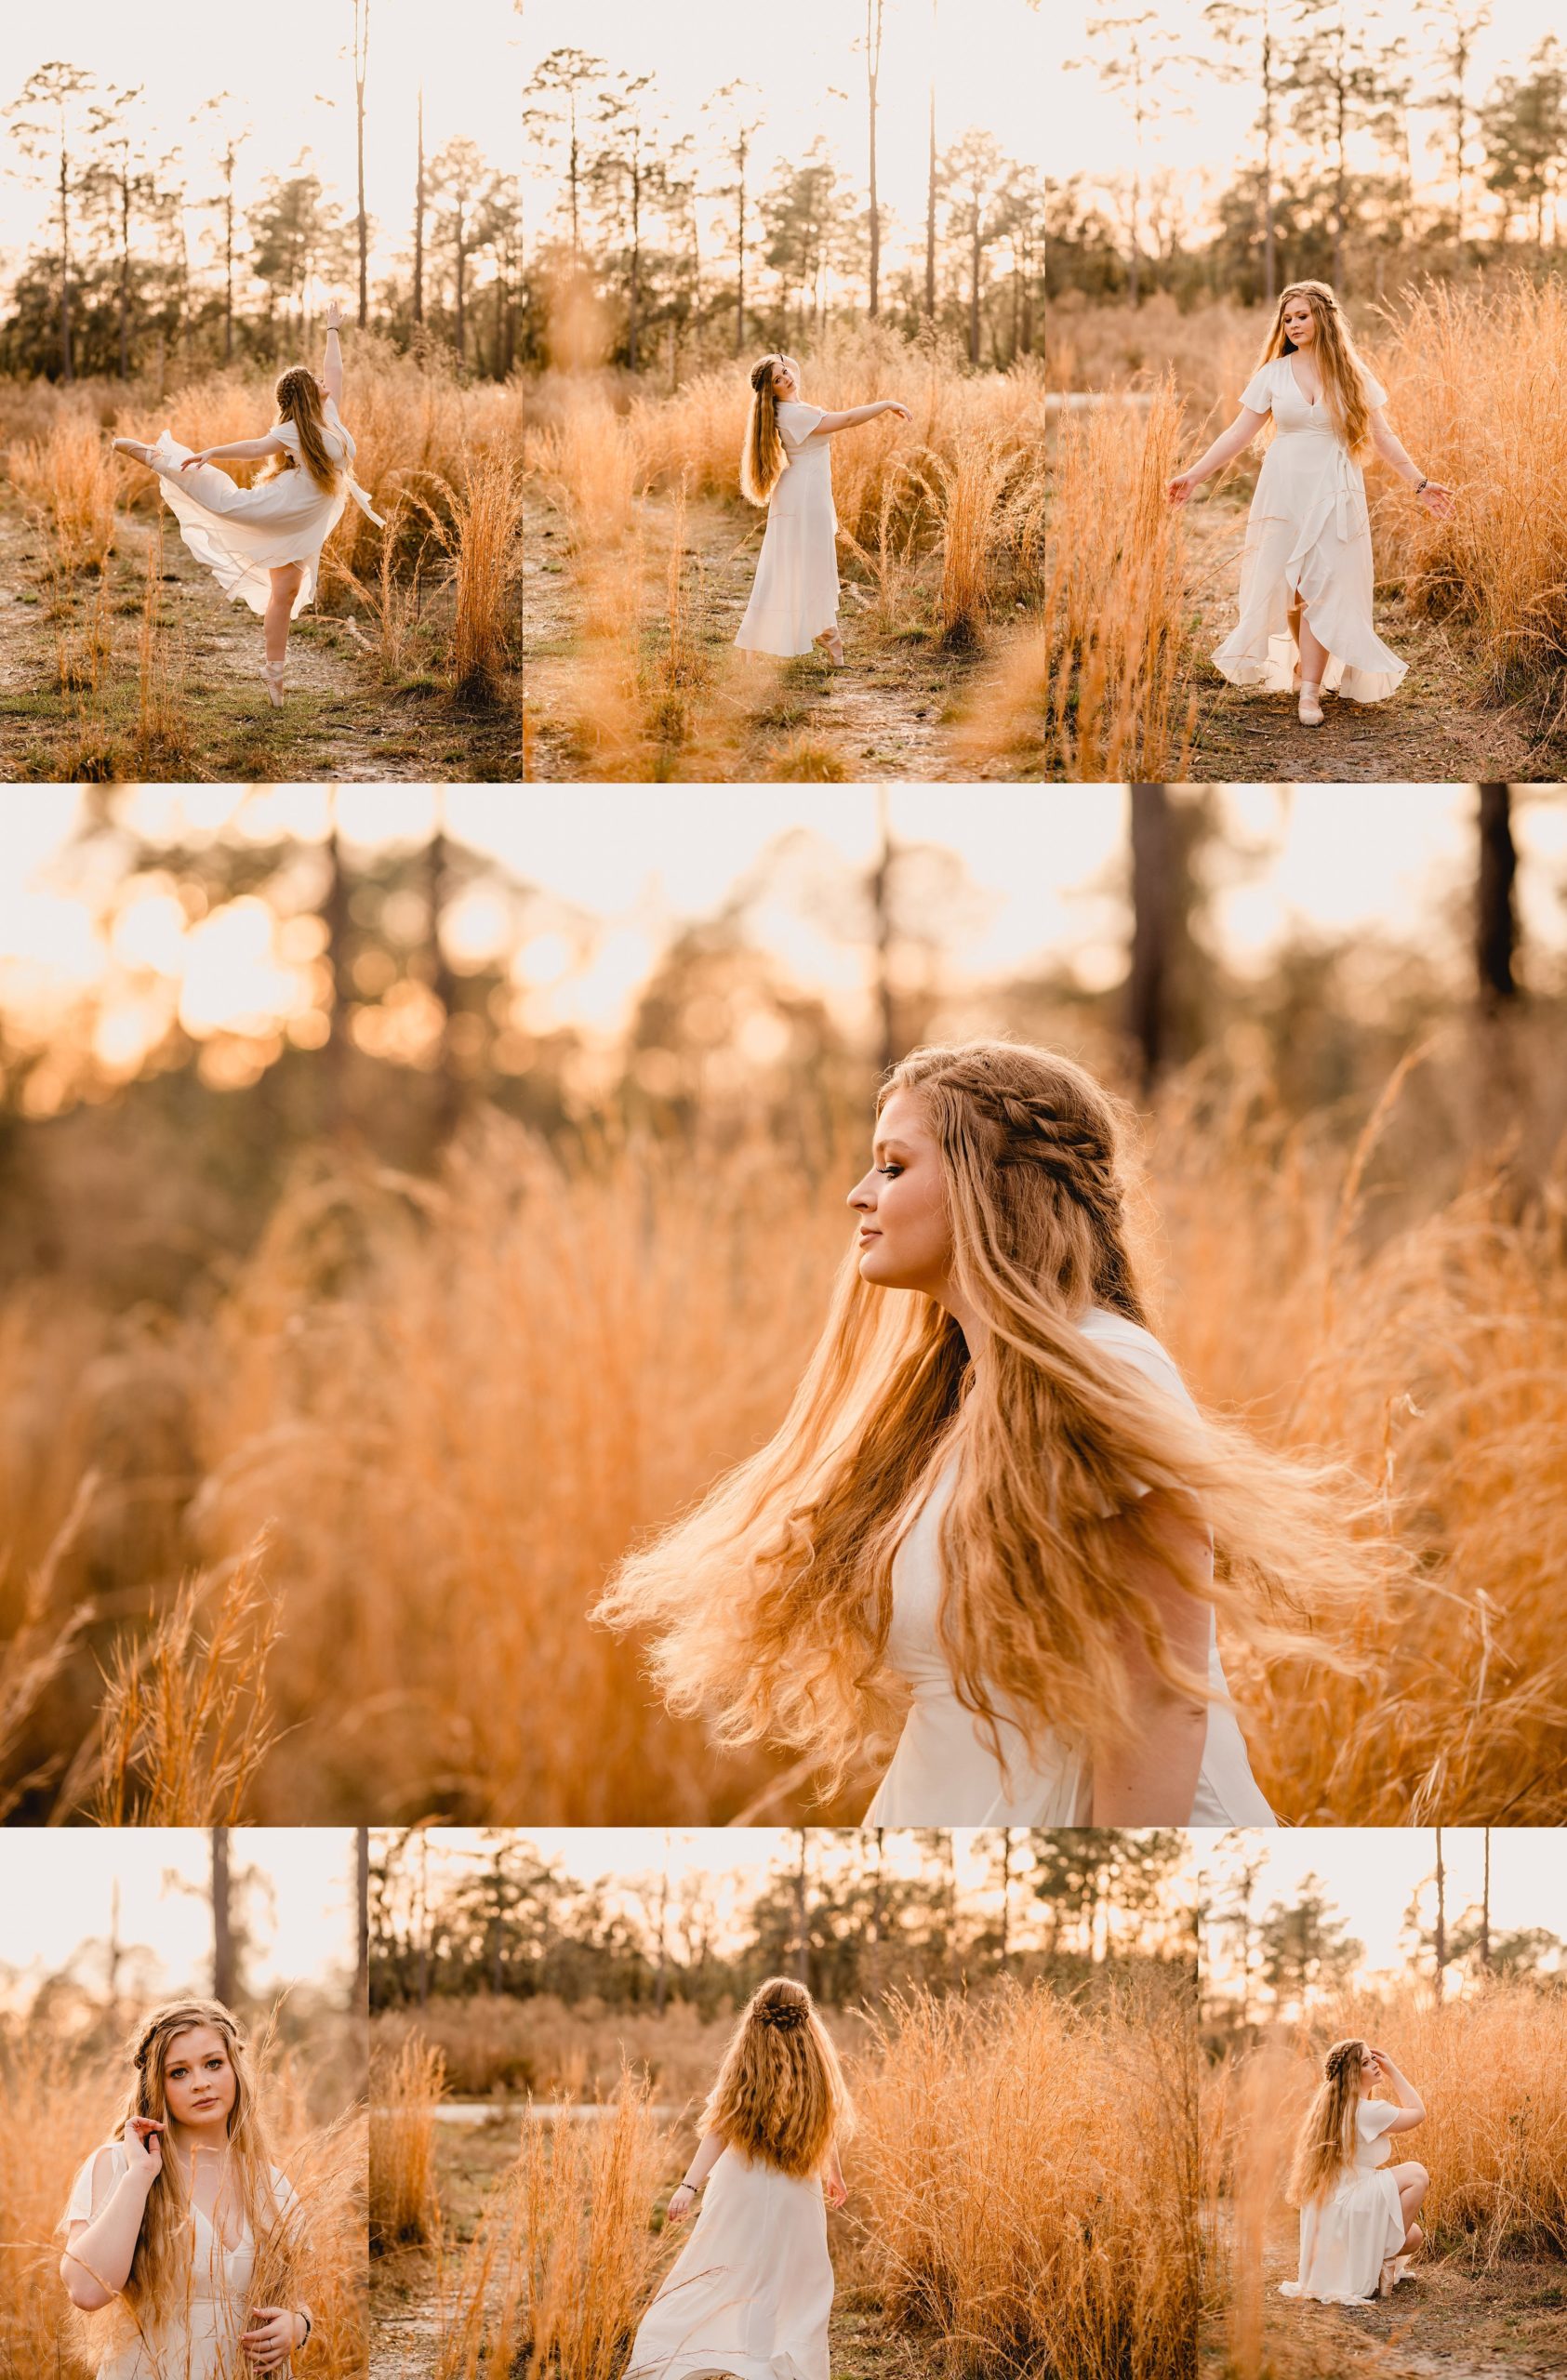 Senior dance pose ideas for pictures in tall grass field during the fall.